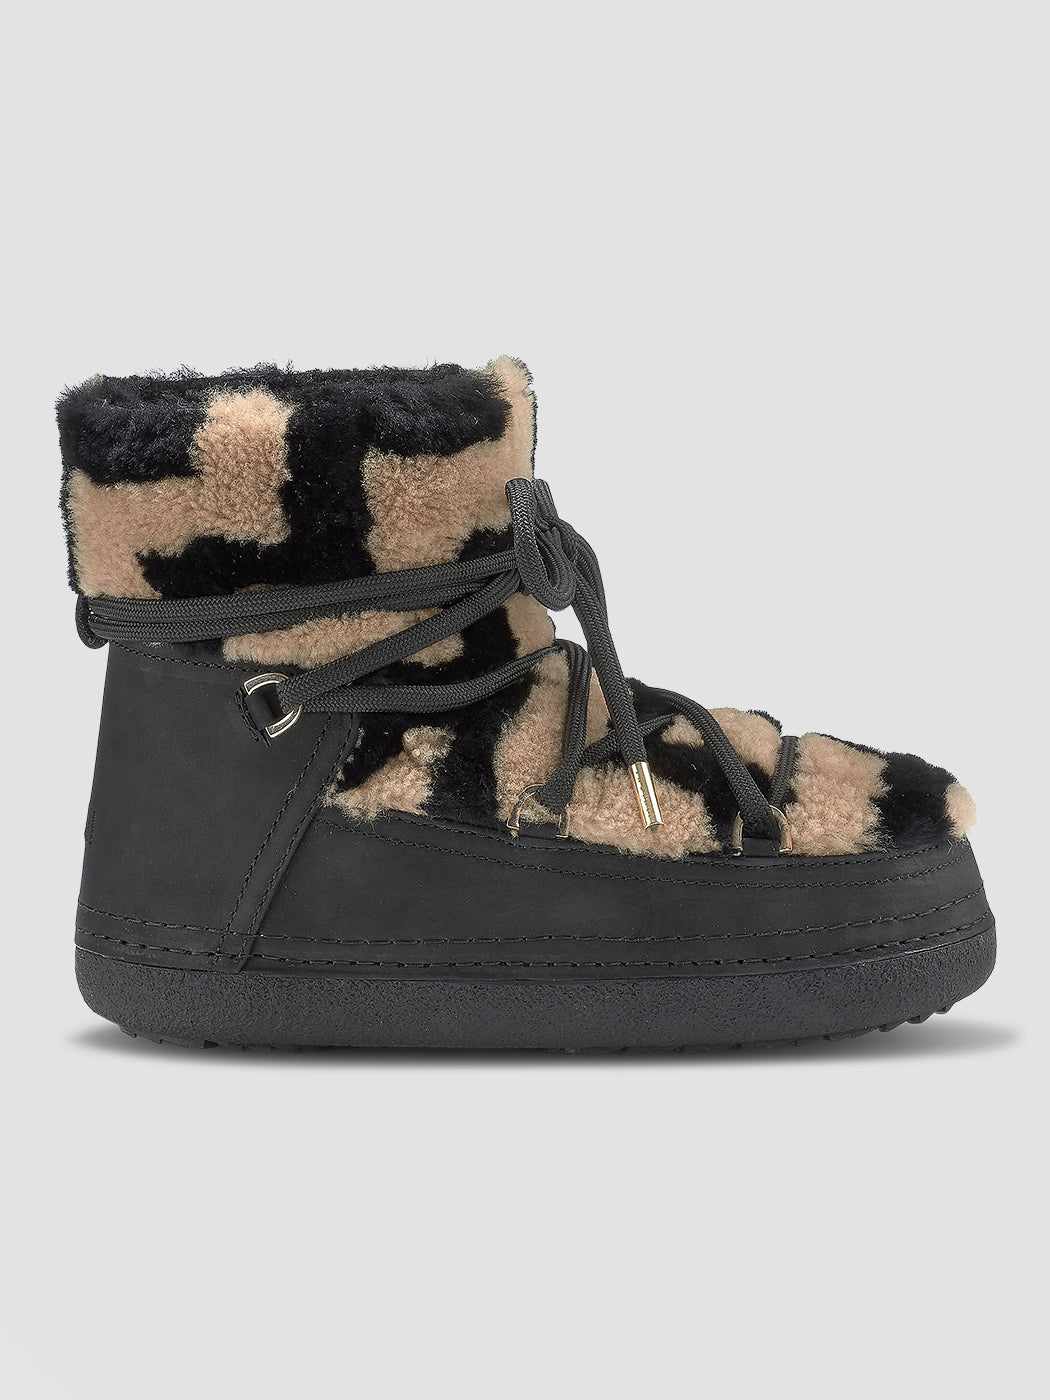 Shearling – Carbon38 Brown Zigzag -